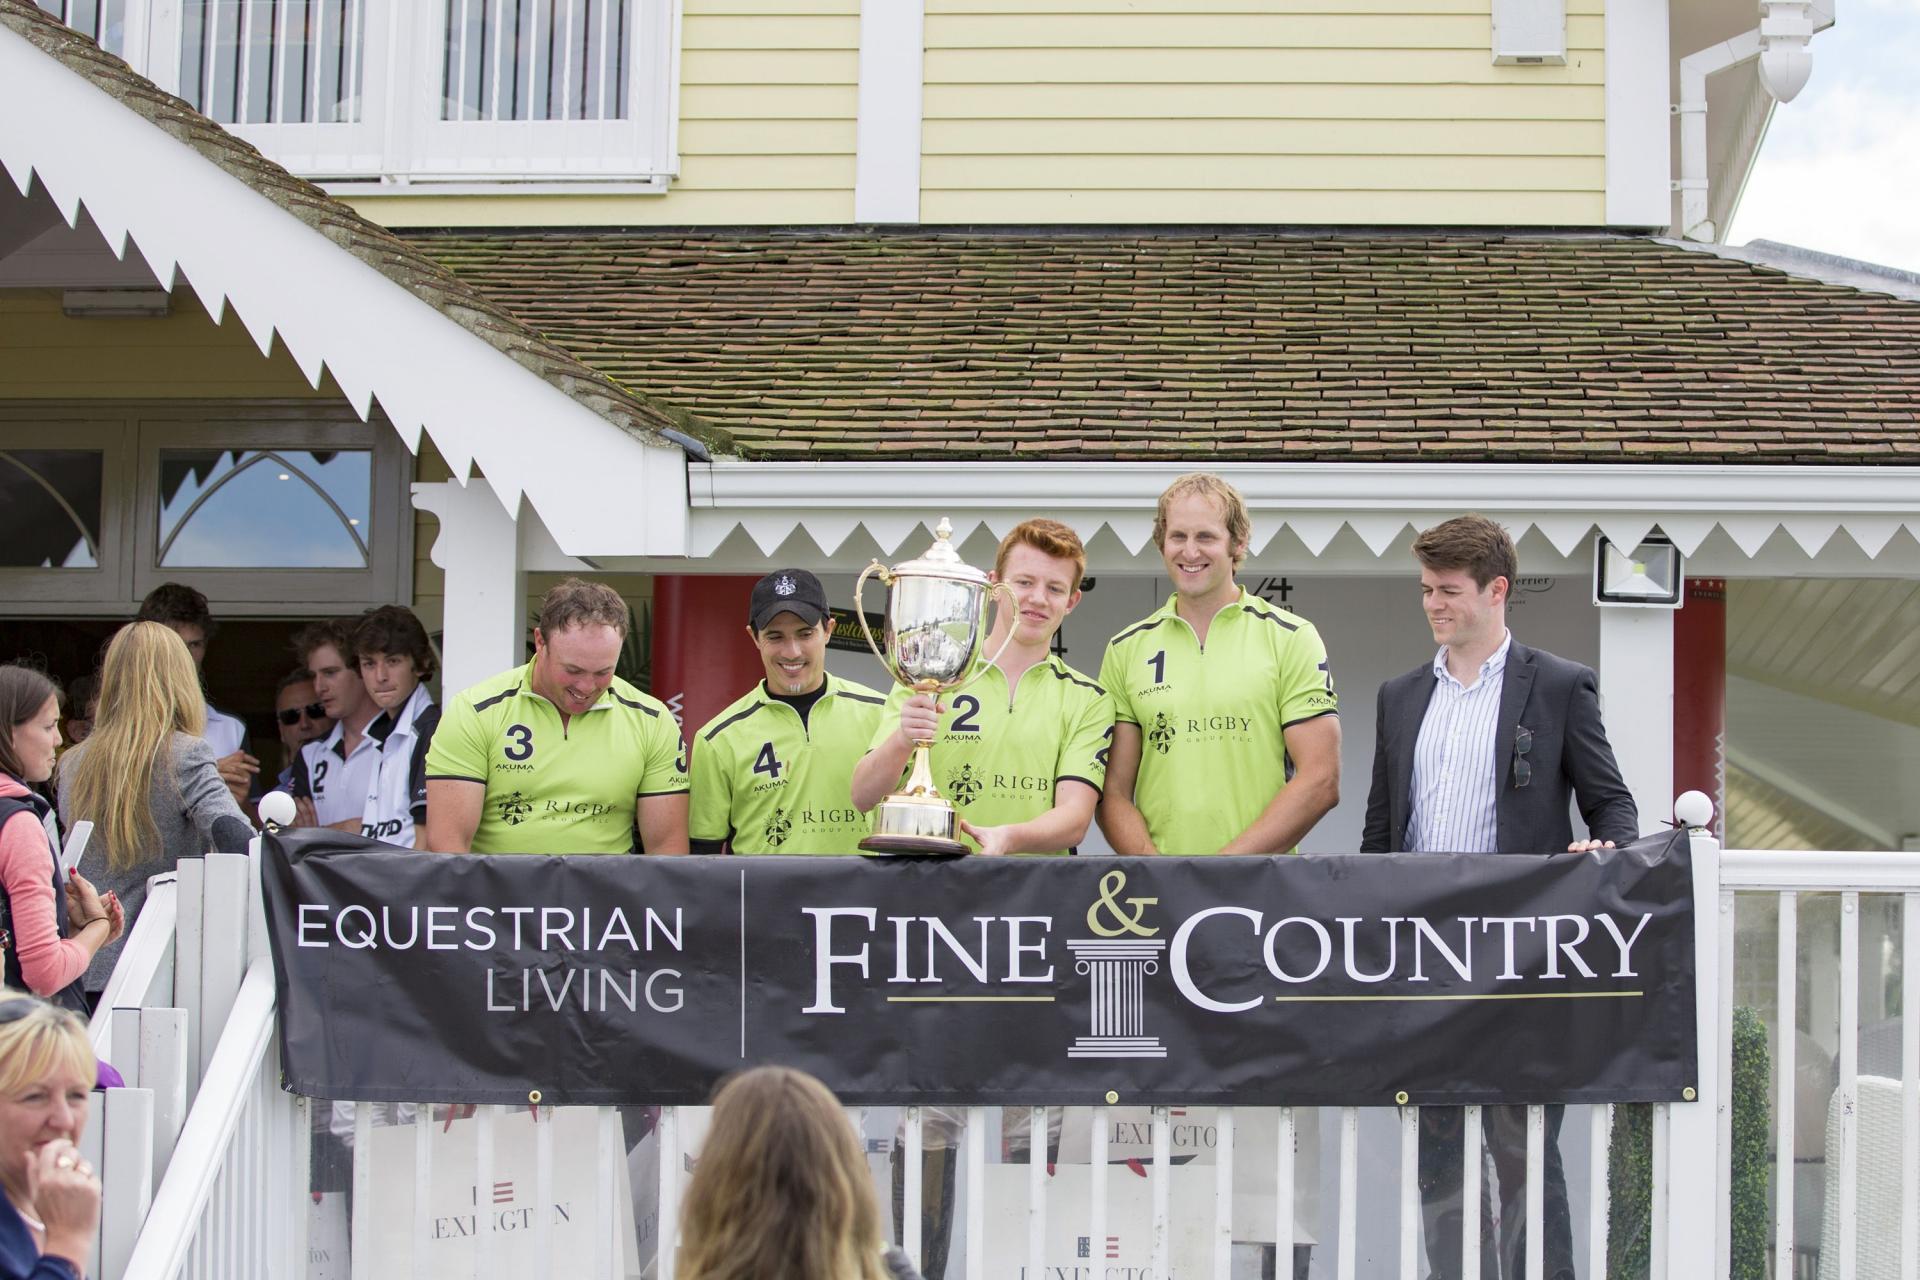 The Fine & Country Gold Cup 2015 – bigger and better than ever